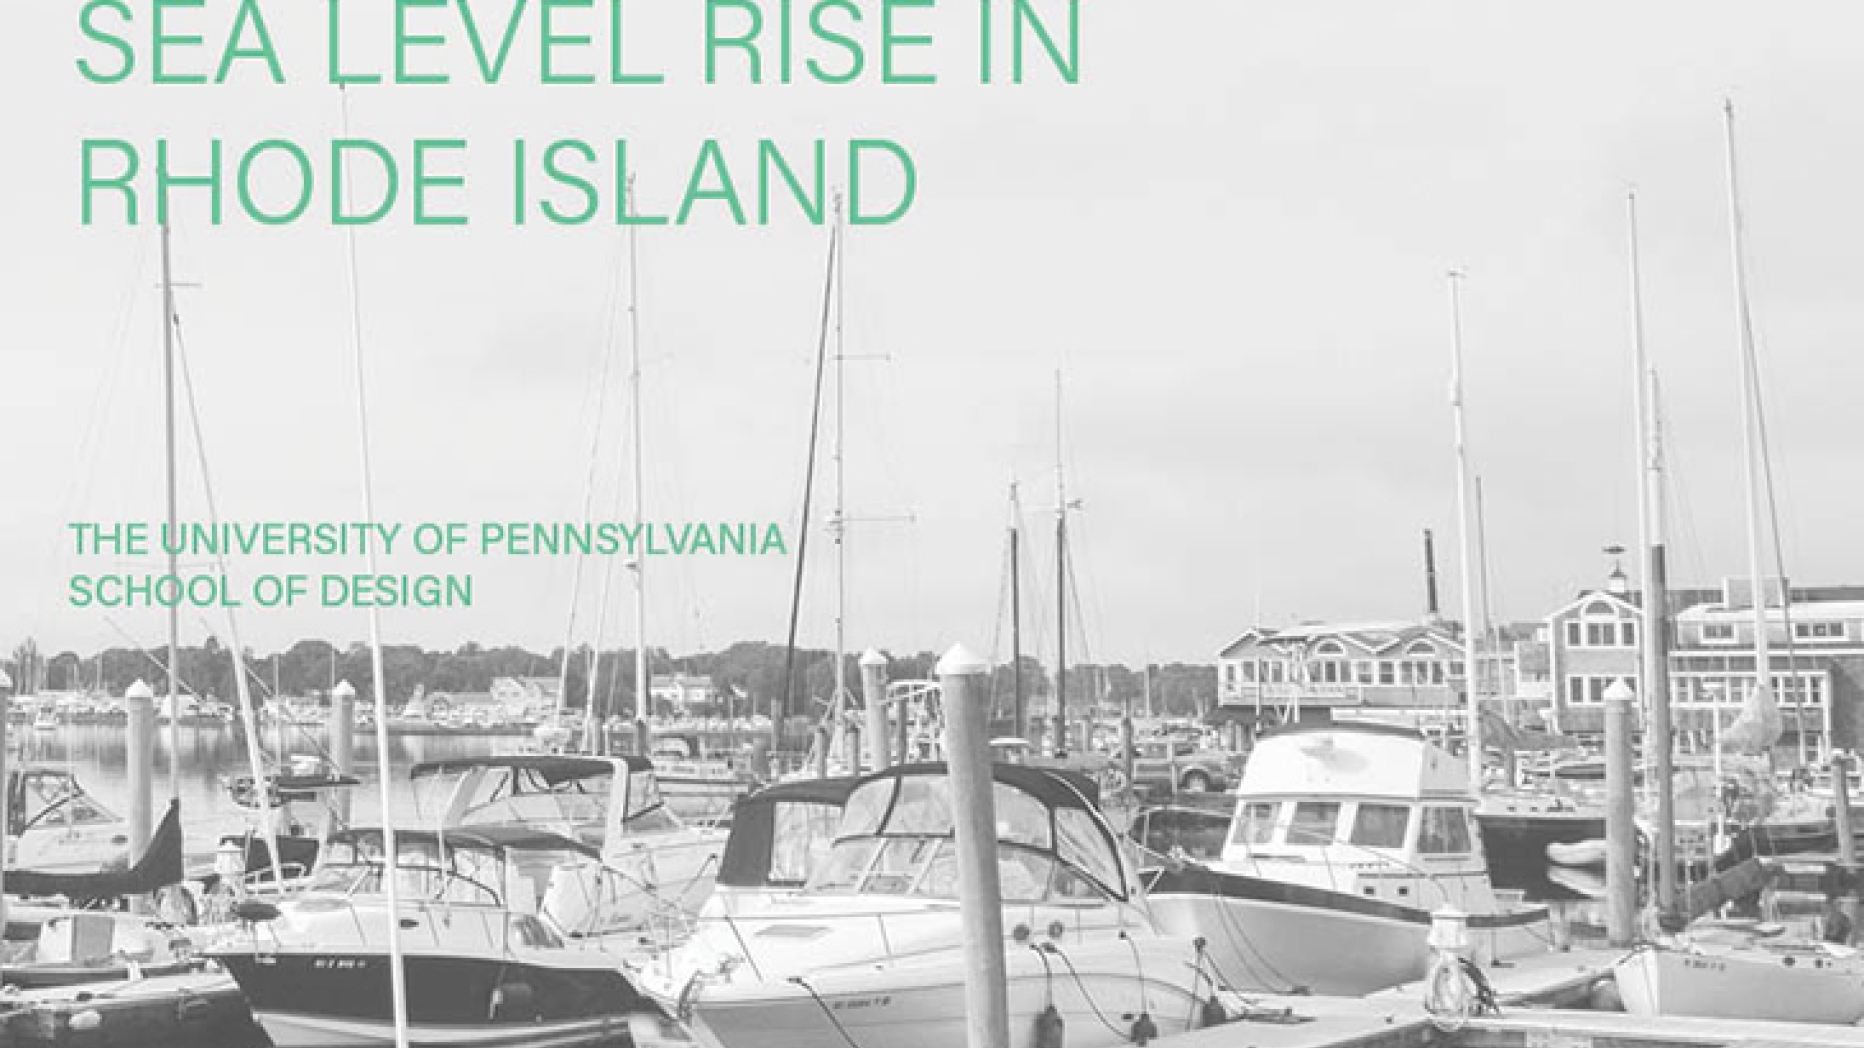 A Future With Water: Sea Level Rise in Rhode Island